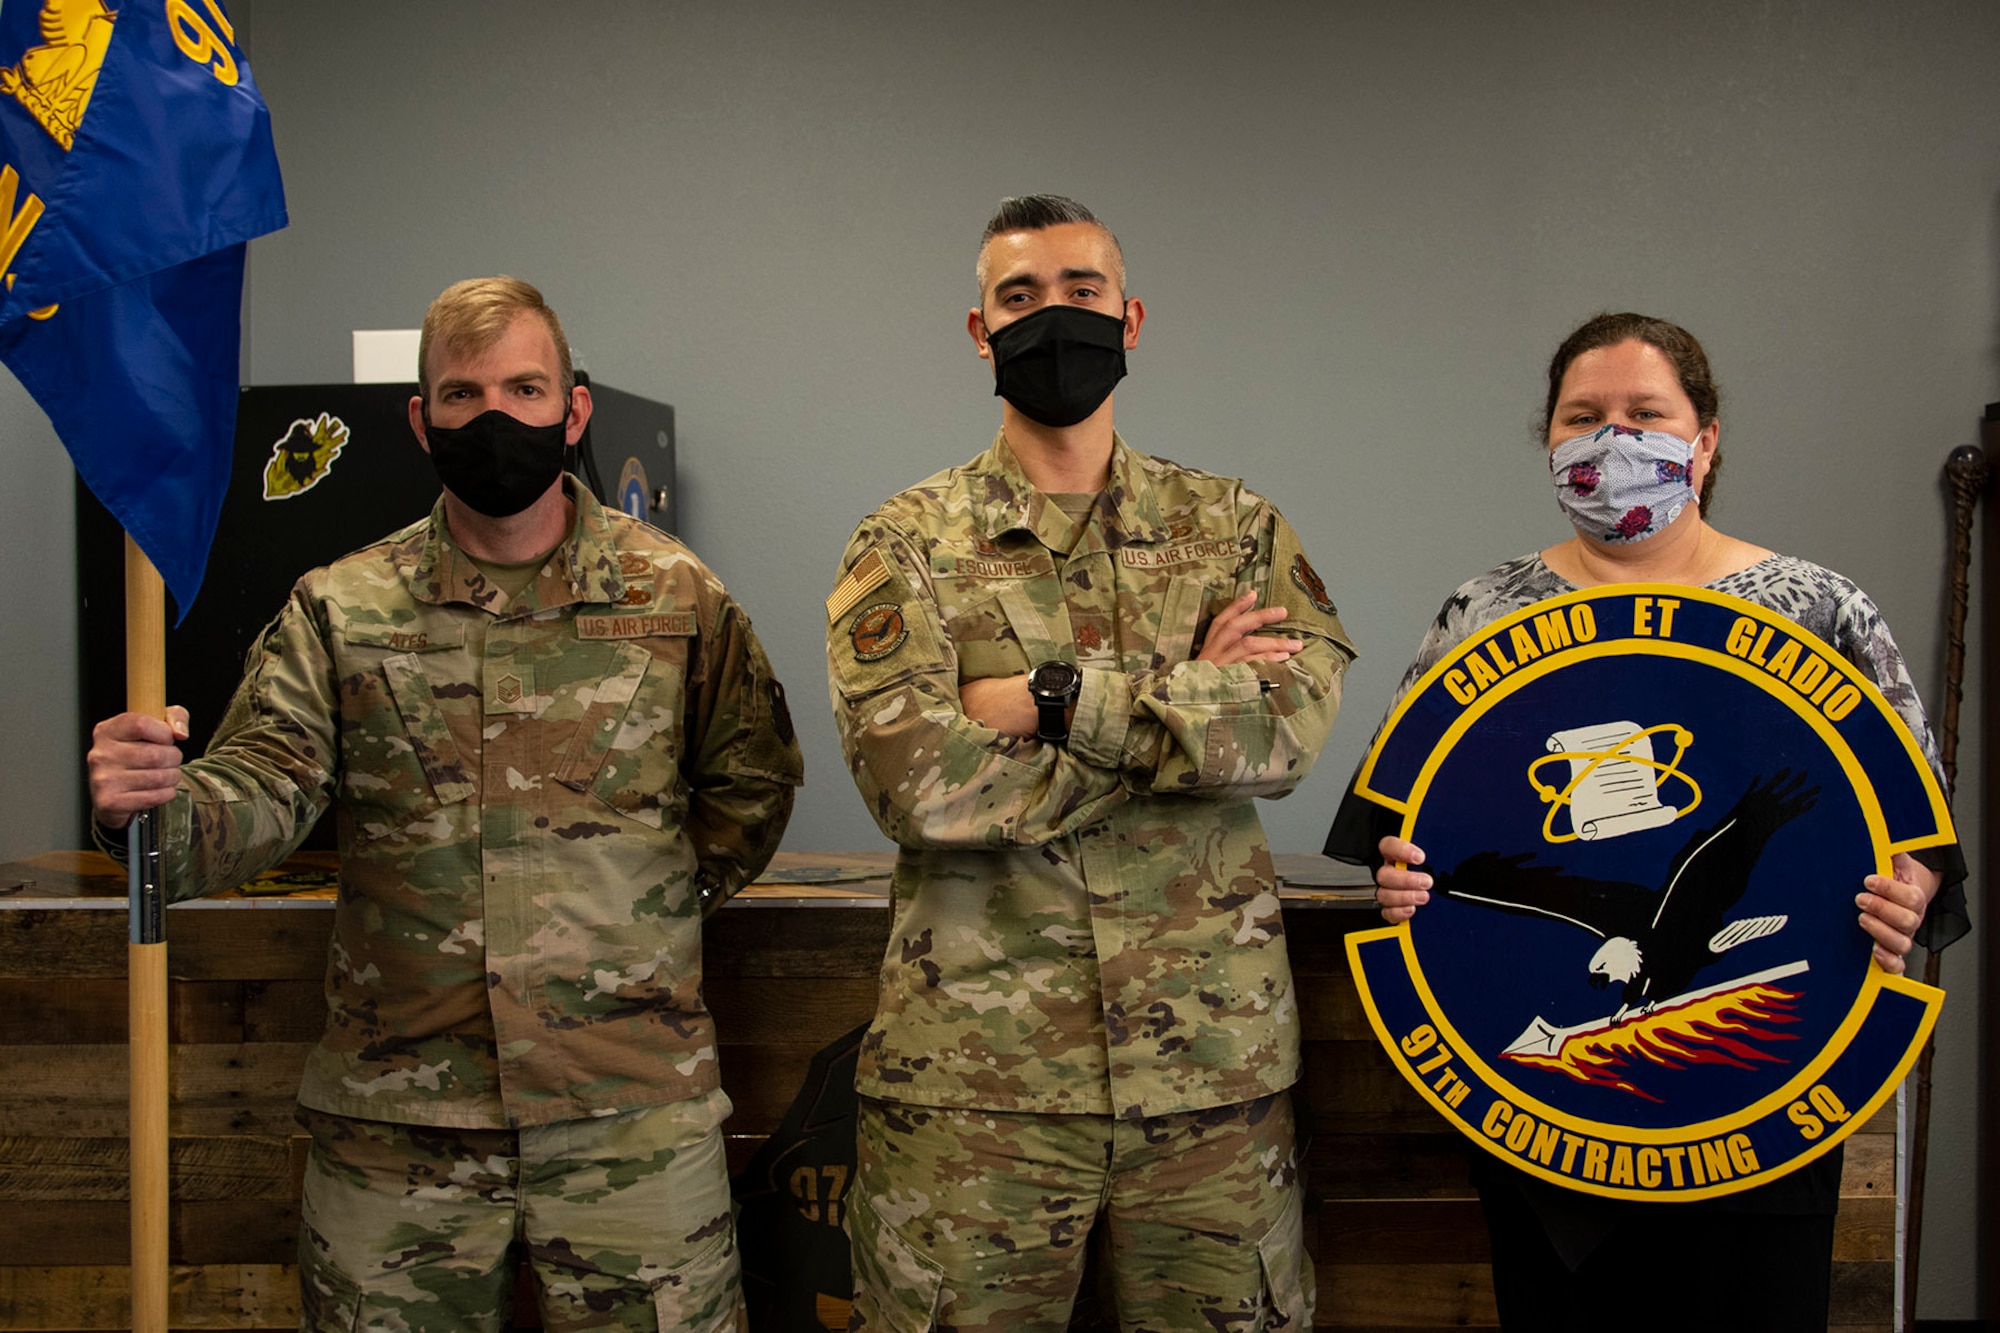 From left, U.S. Air Force Master Sgt. Christian Ates, 97th Contracting Squadron (CONS) senior enlisted leader, Maj. Jonathan Esquivel, 97th CONS commander, and Lori Clinton, 97th CONS director of business operations, gather for a photo at Altus Air Force Base, Oklahoma, Sept. 21, 2021. The 97th CONS was redesignated as a flight in June of 2014 due to manning, despite a steady increase in the amount of dollars and contracts the team managed after the base received the first KC-46 Pegasus. (U.S. Air Force photo by Senior Airman Amanda Lovelace)